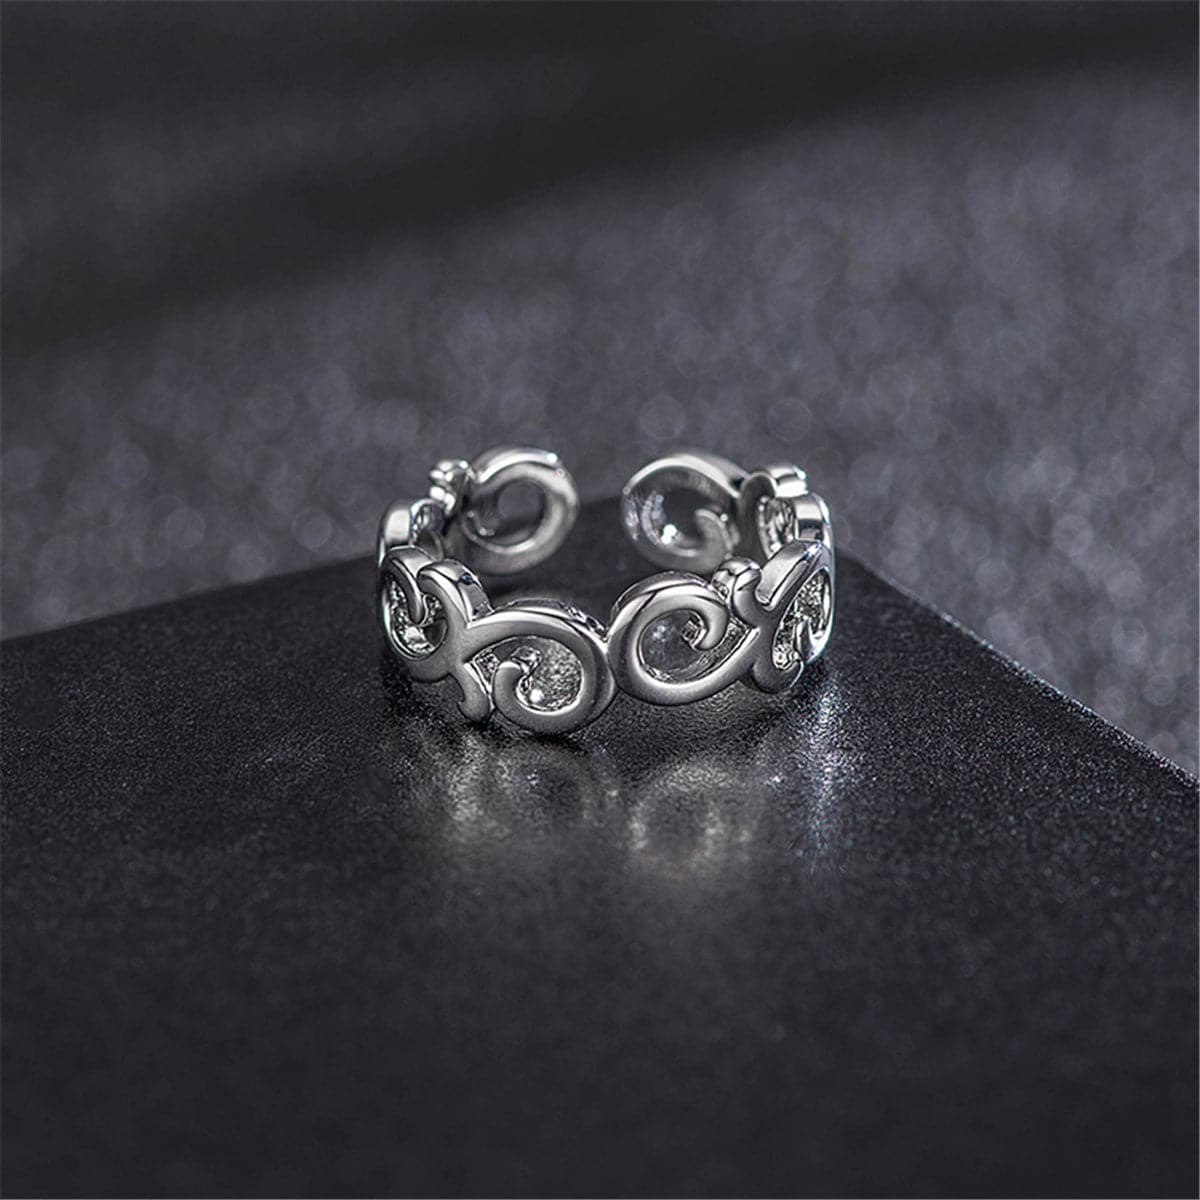 Cubic Zirconia & Silver-Plated Adjustable Botany Toe Ring Set